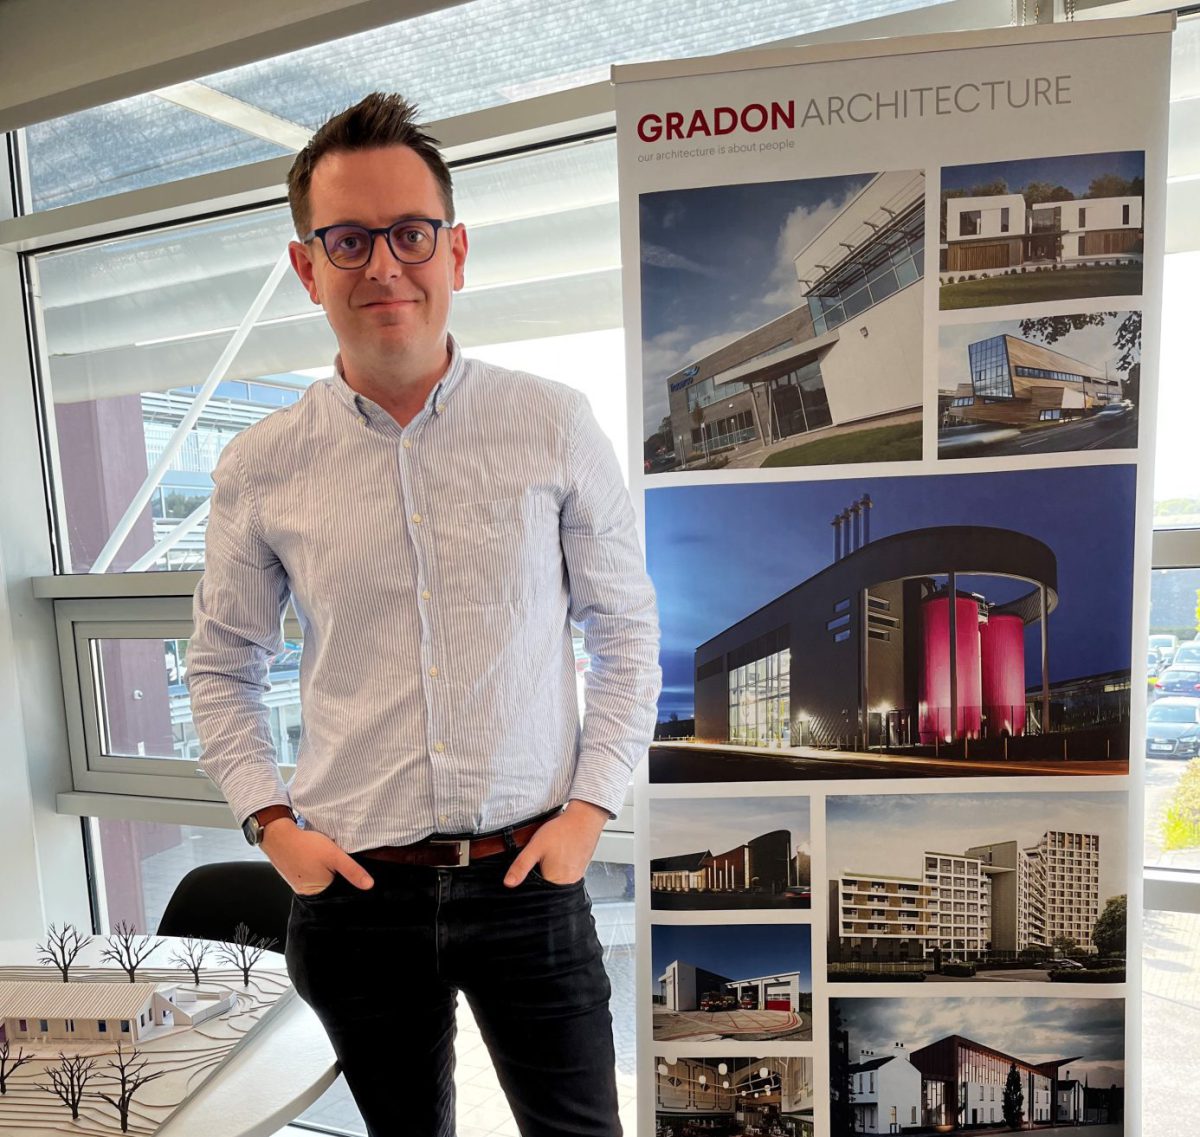 “Our Architecture is About People”…Robert Davidson Promoted to Senior Architect